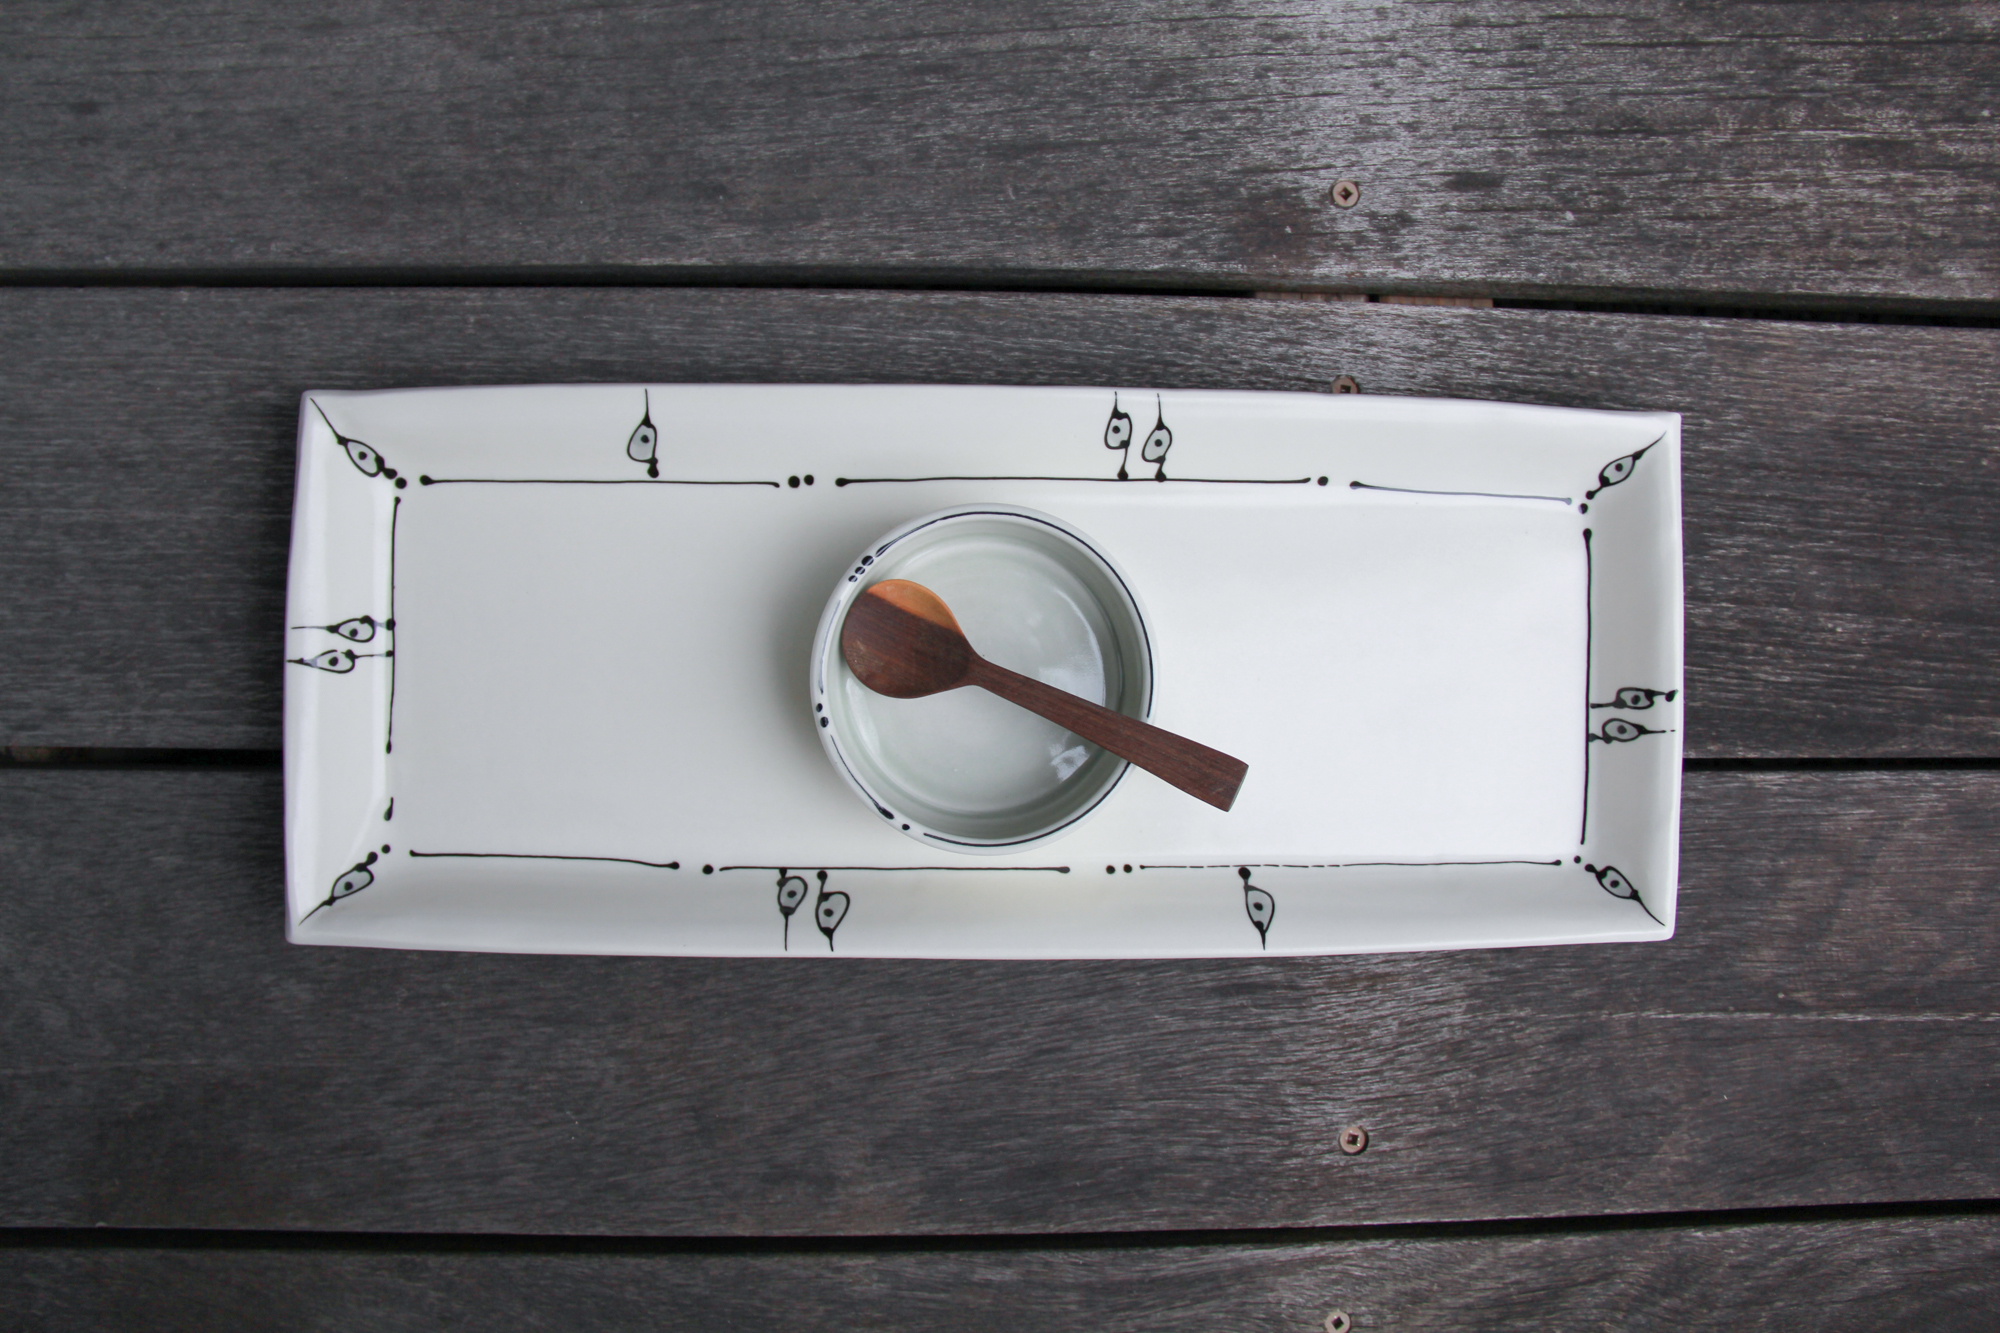 Iris Dorton: Medium Tray with Circle Dot Line Motif, comes with Wood Spoon and Dish Product Image 1 of 11